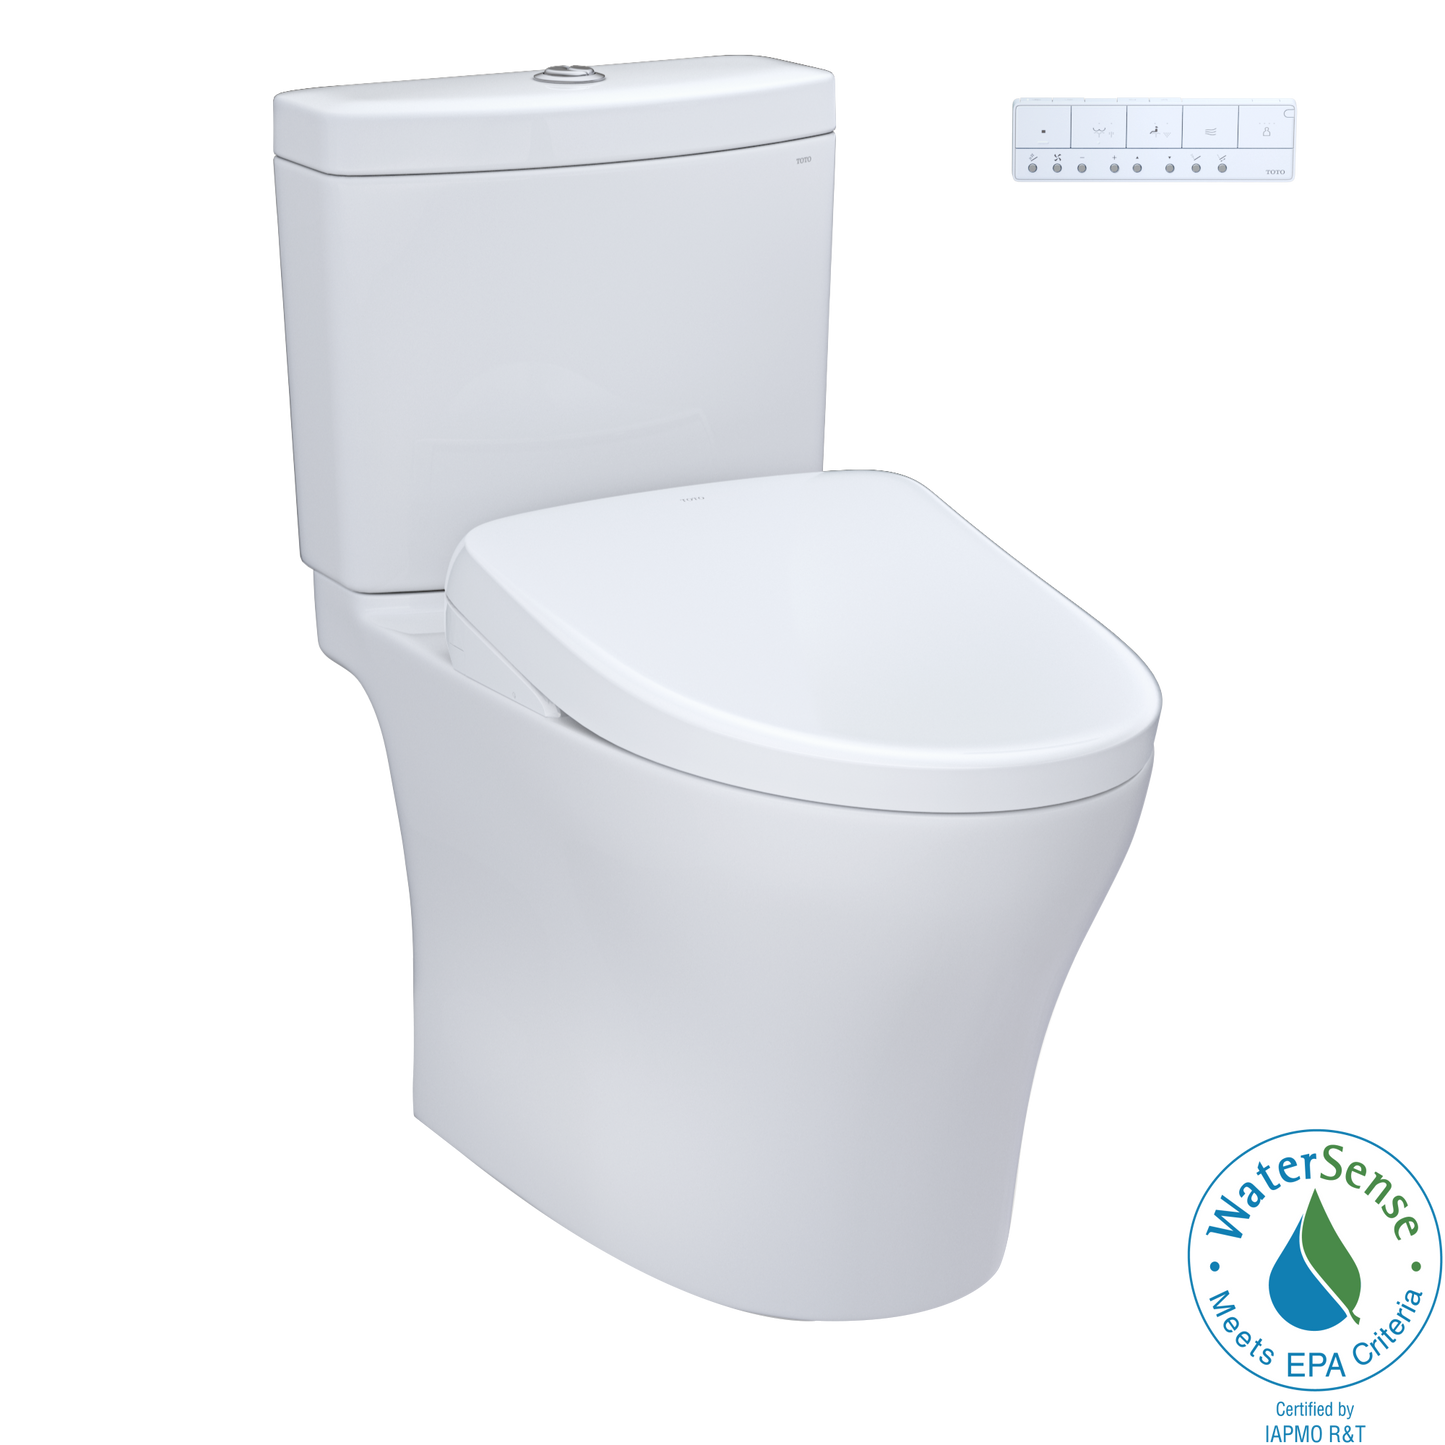 TOTO® WASHLET®+ Aquia IV Two-Piece Elongated Dual Flush 1.28 and 0.9 GPF Toilet and Contemporary WASHLET S7A Contemporary Bidet Seat, Cotton White - MW4464736CEMGN#01